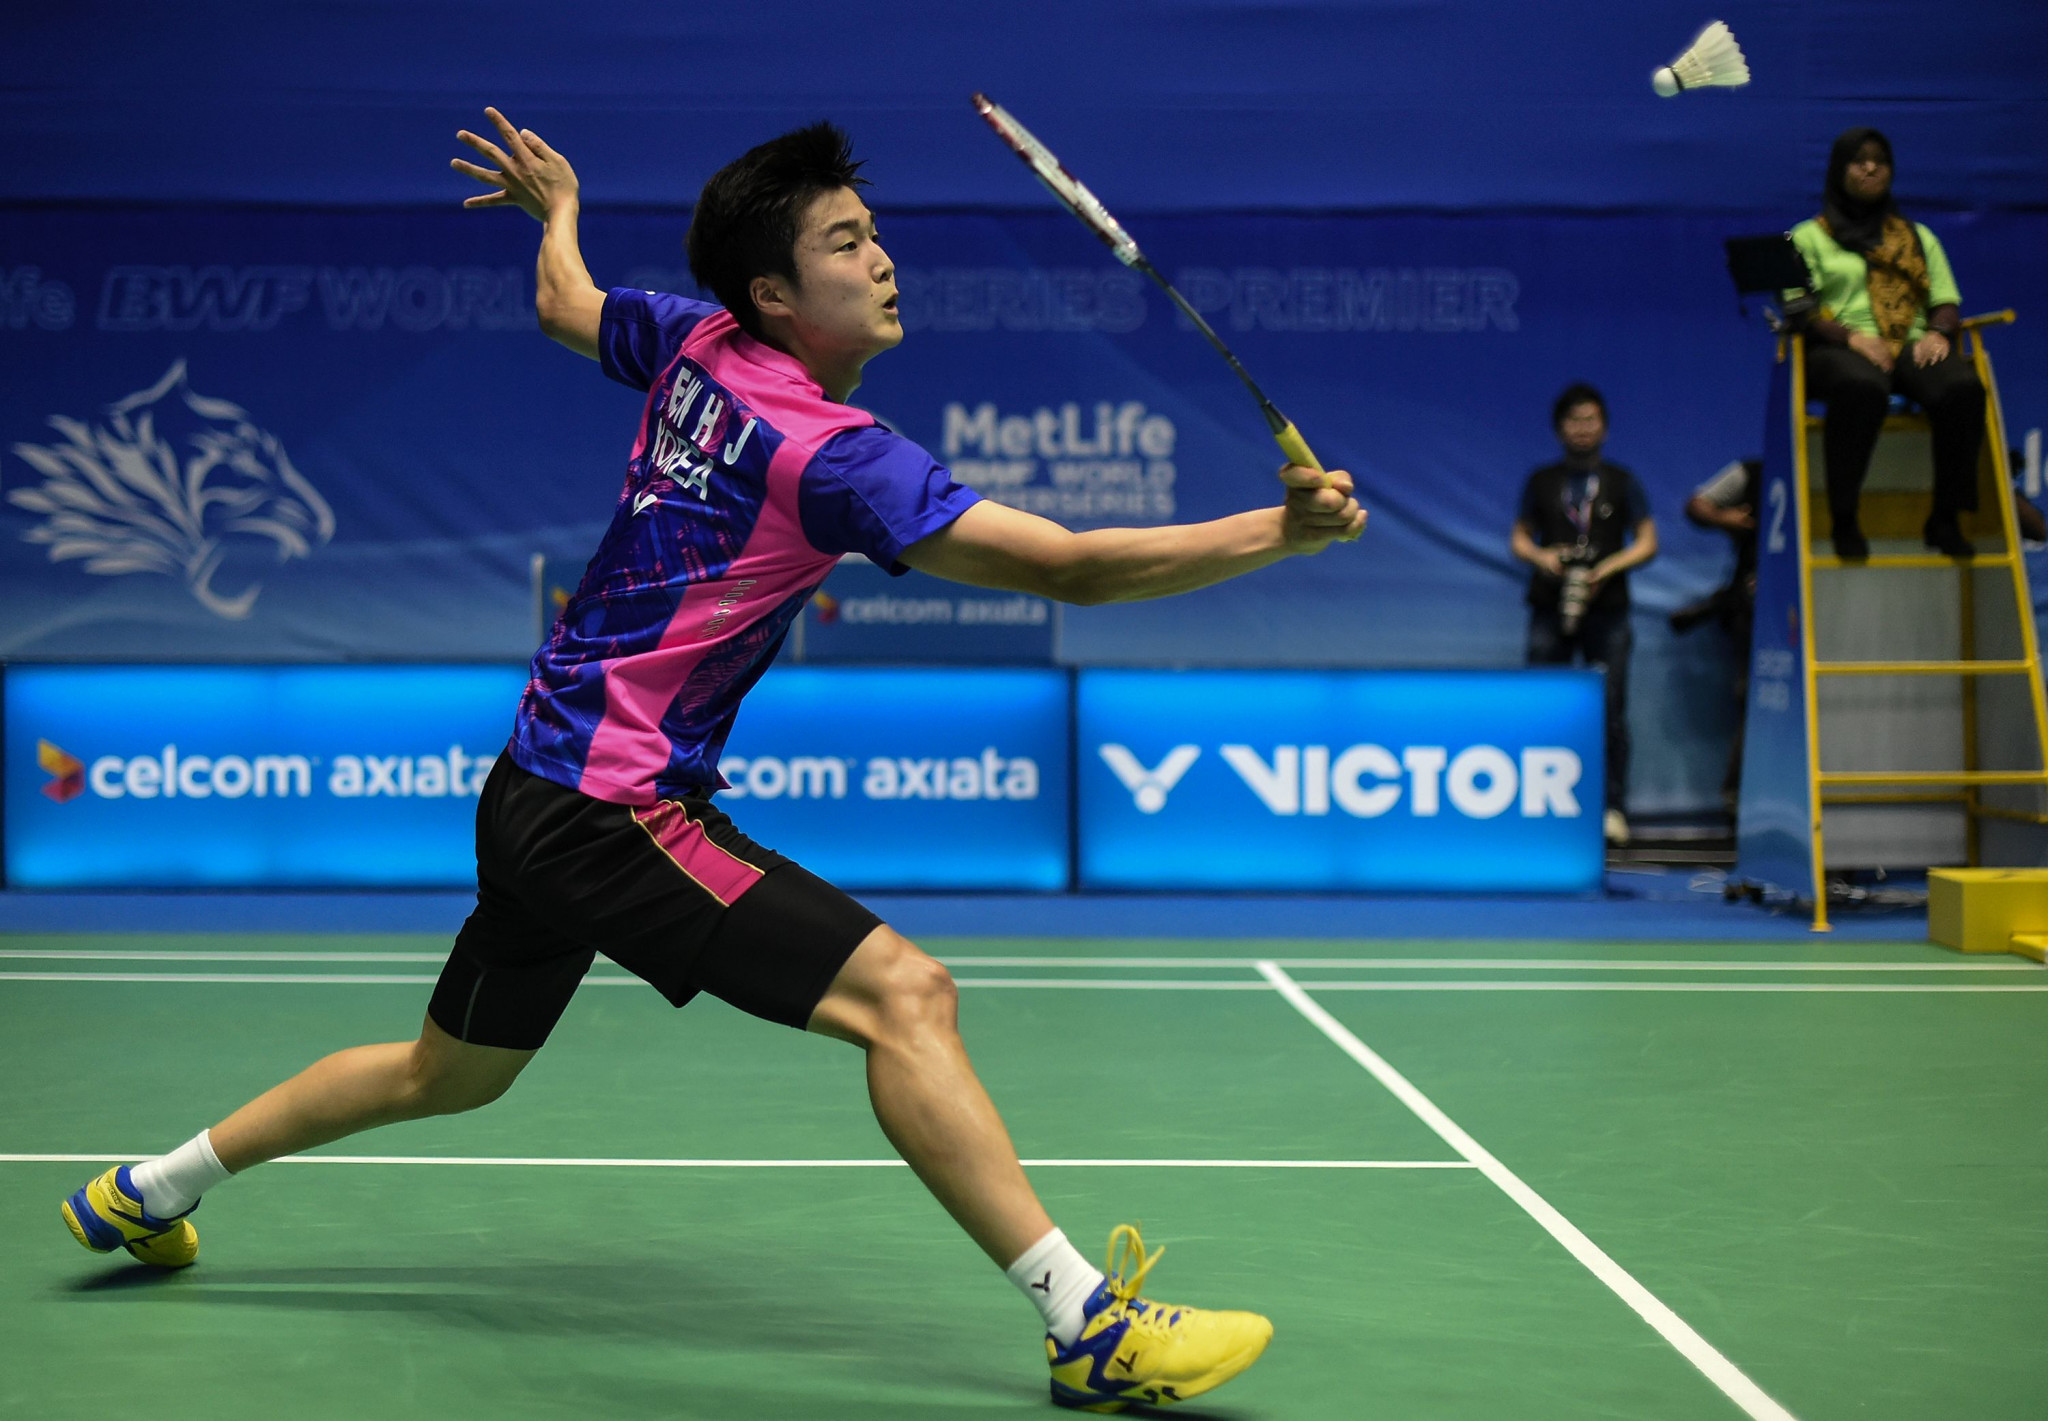 Jeon Hyeok-jin battled to a three-game victory over compatriot Kim Min-ki in the men's singles final ©Getty Images